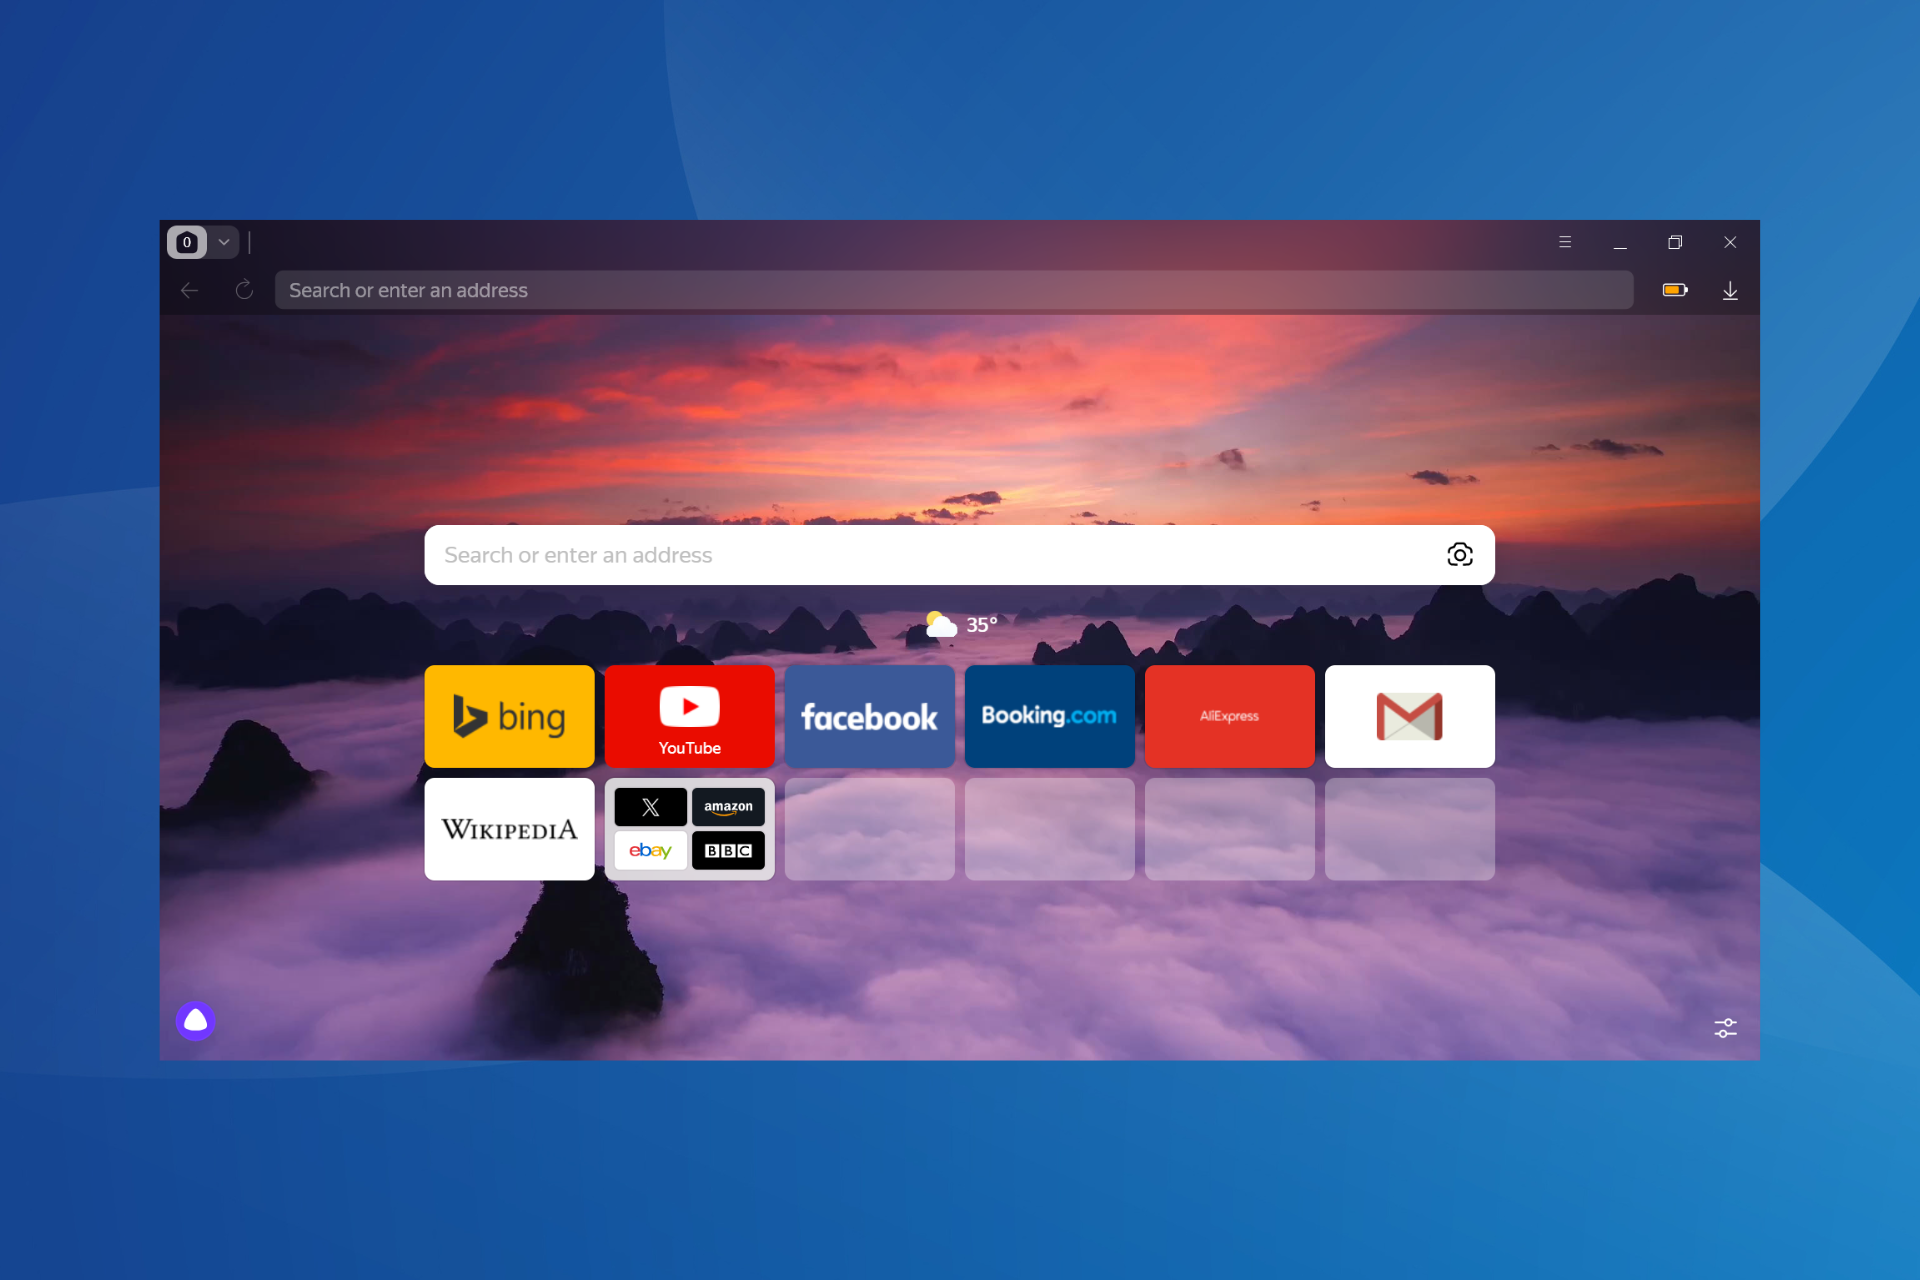 Still on Windows 7? Yandex Browser may be the most secure option for you